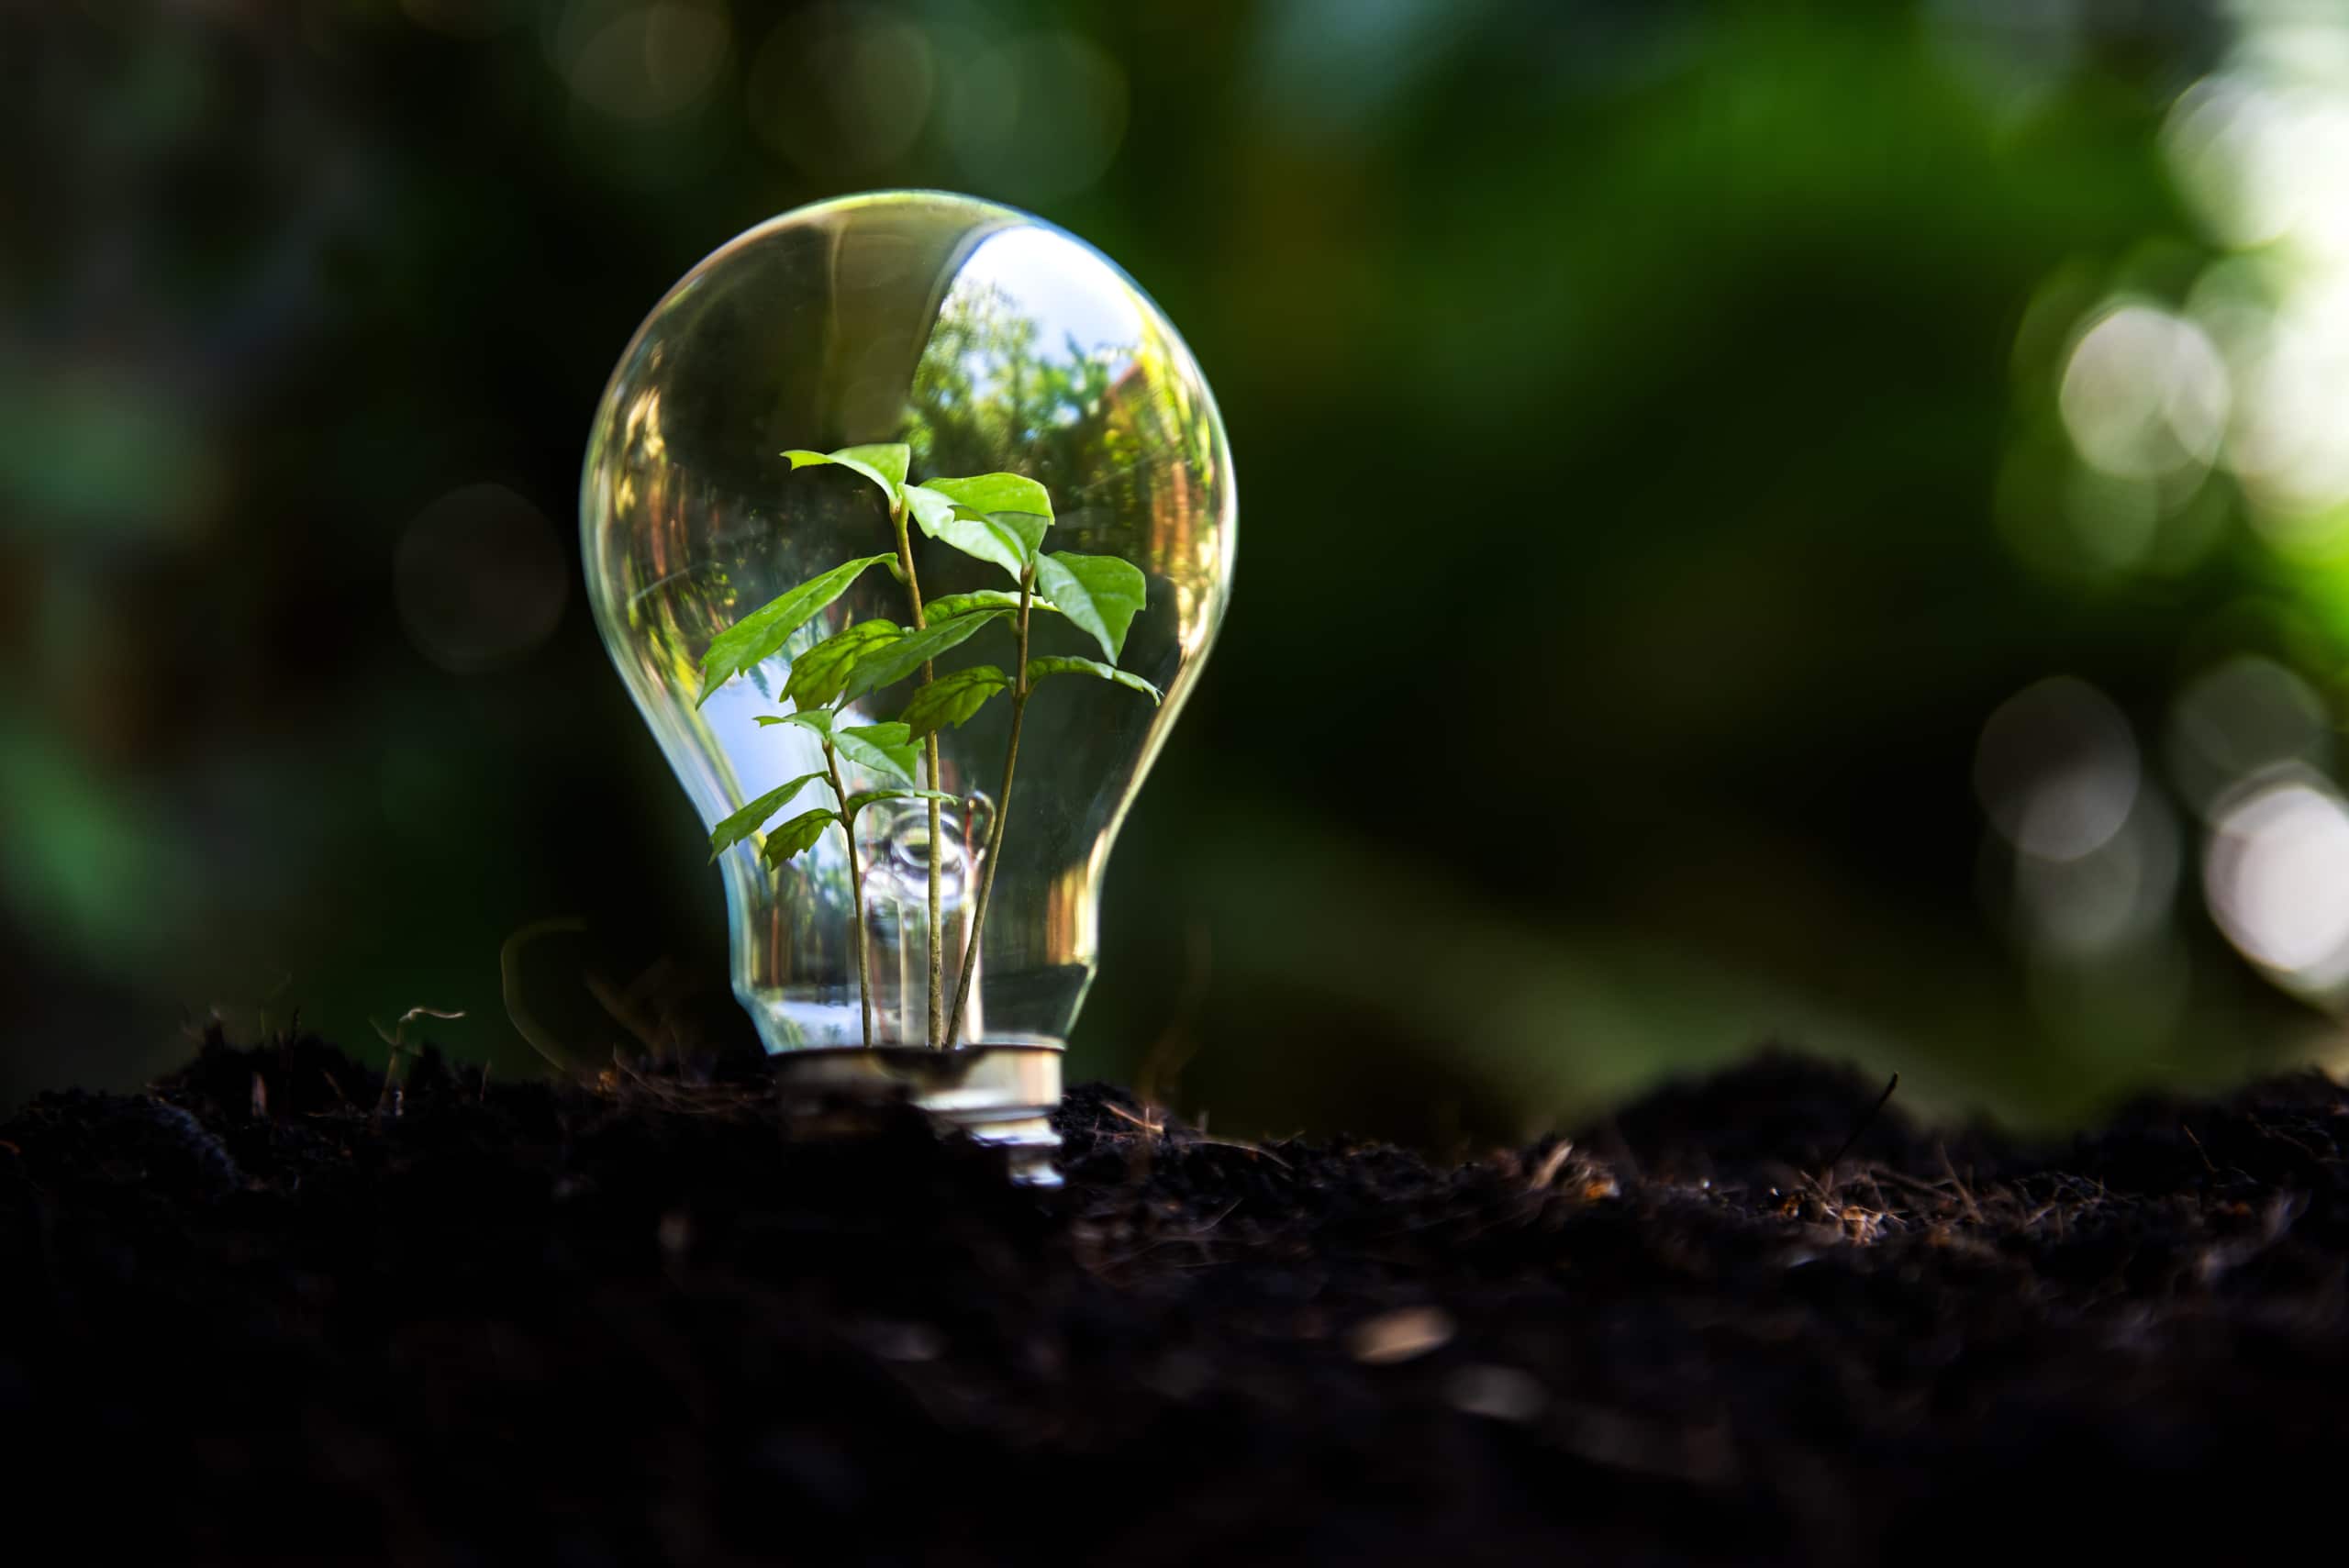 Lightbulb rising from the soil with a green plant inside.